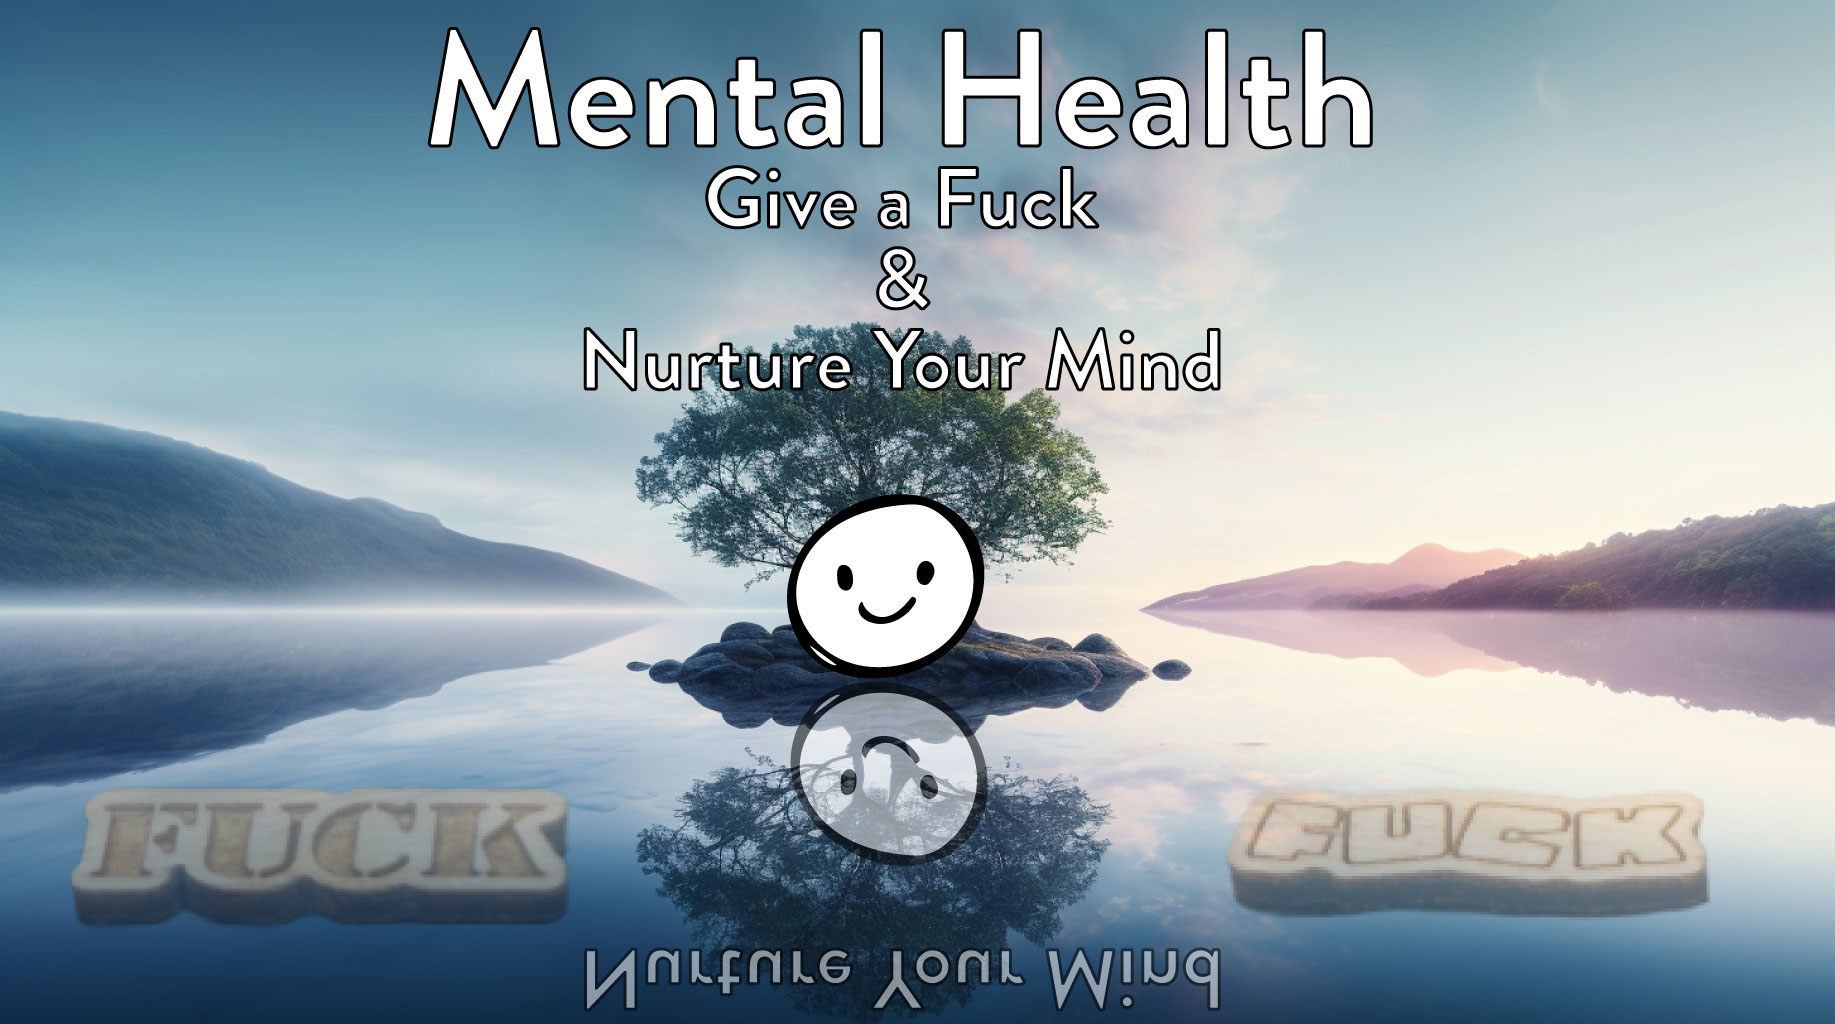 Mental Health: Give a Fuck and Nurture Your Mind